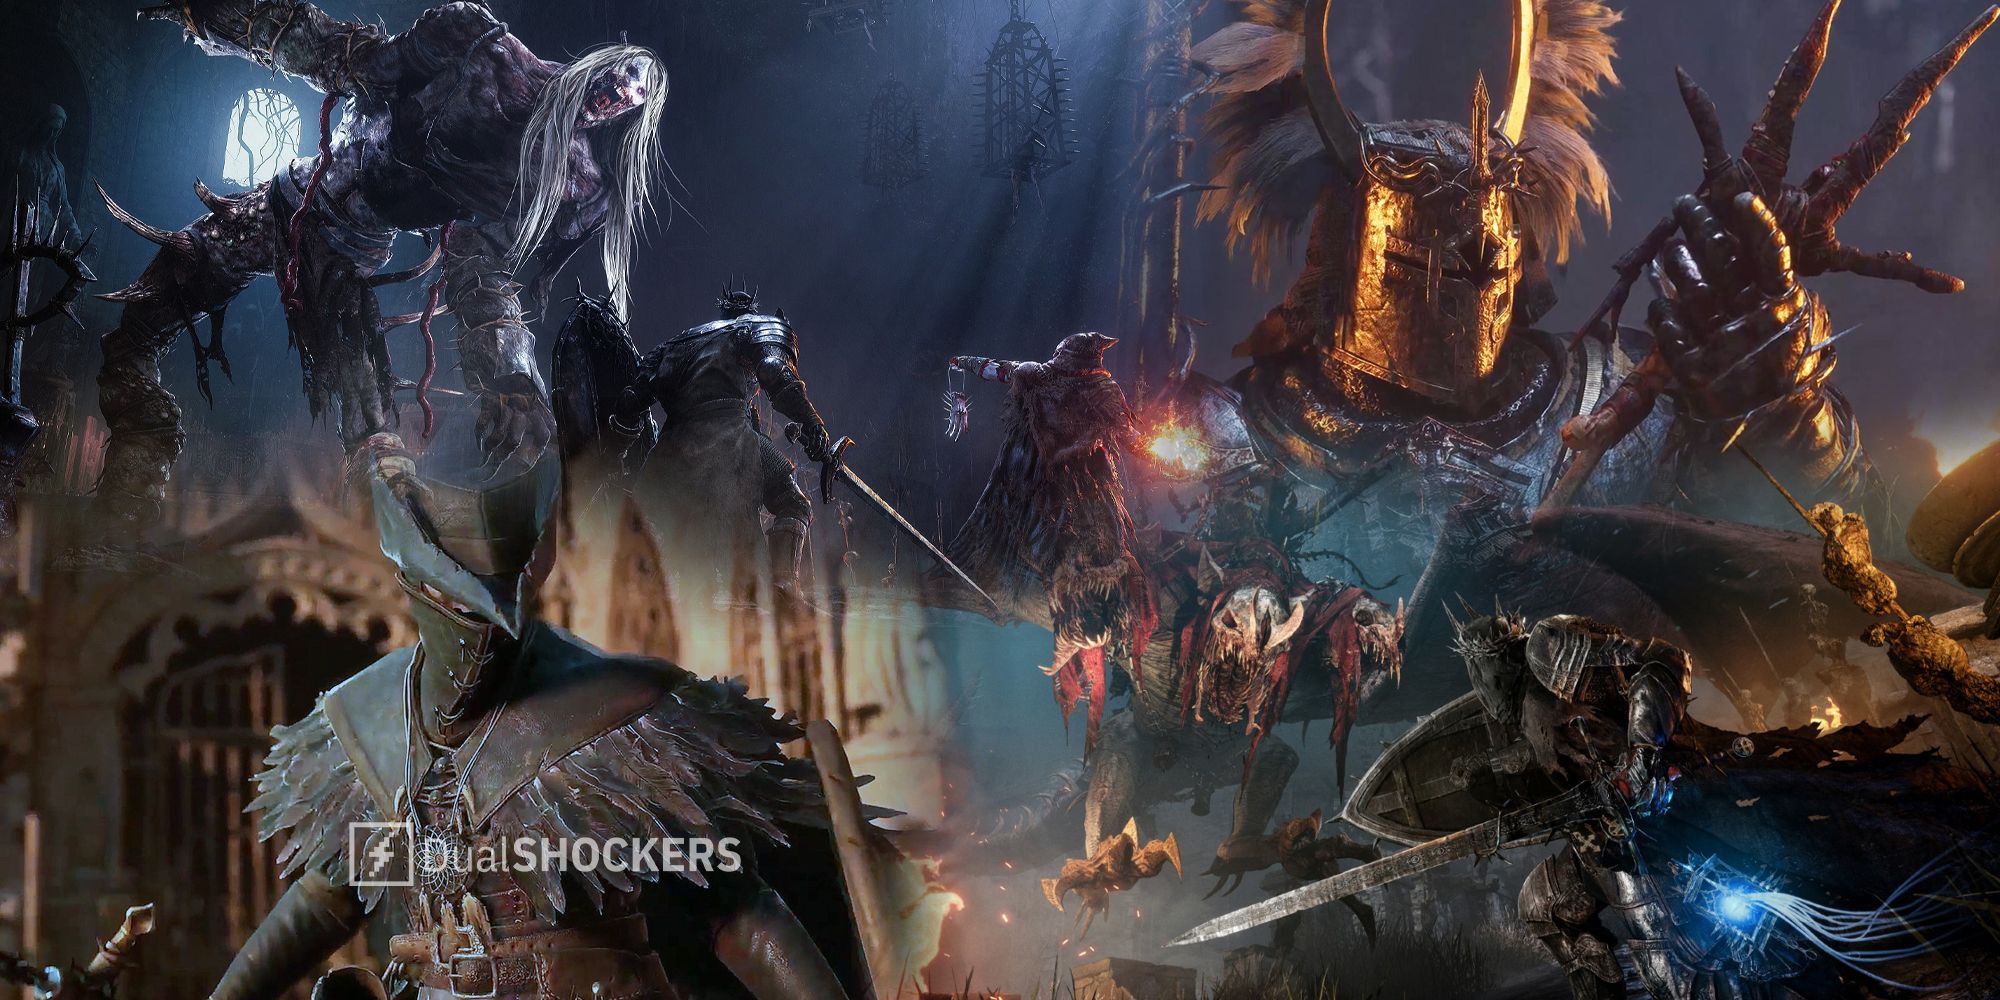 Lords of the Fallen Global Release Time Confirmed - IGN